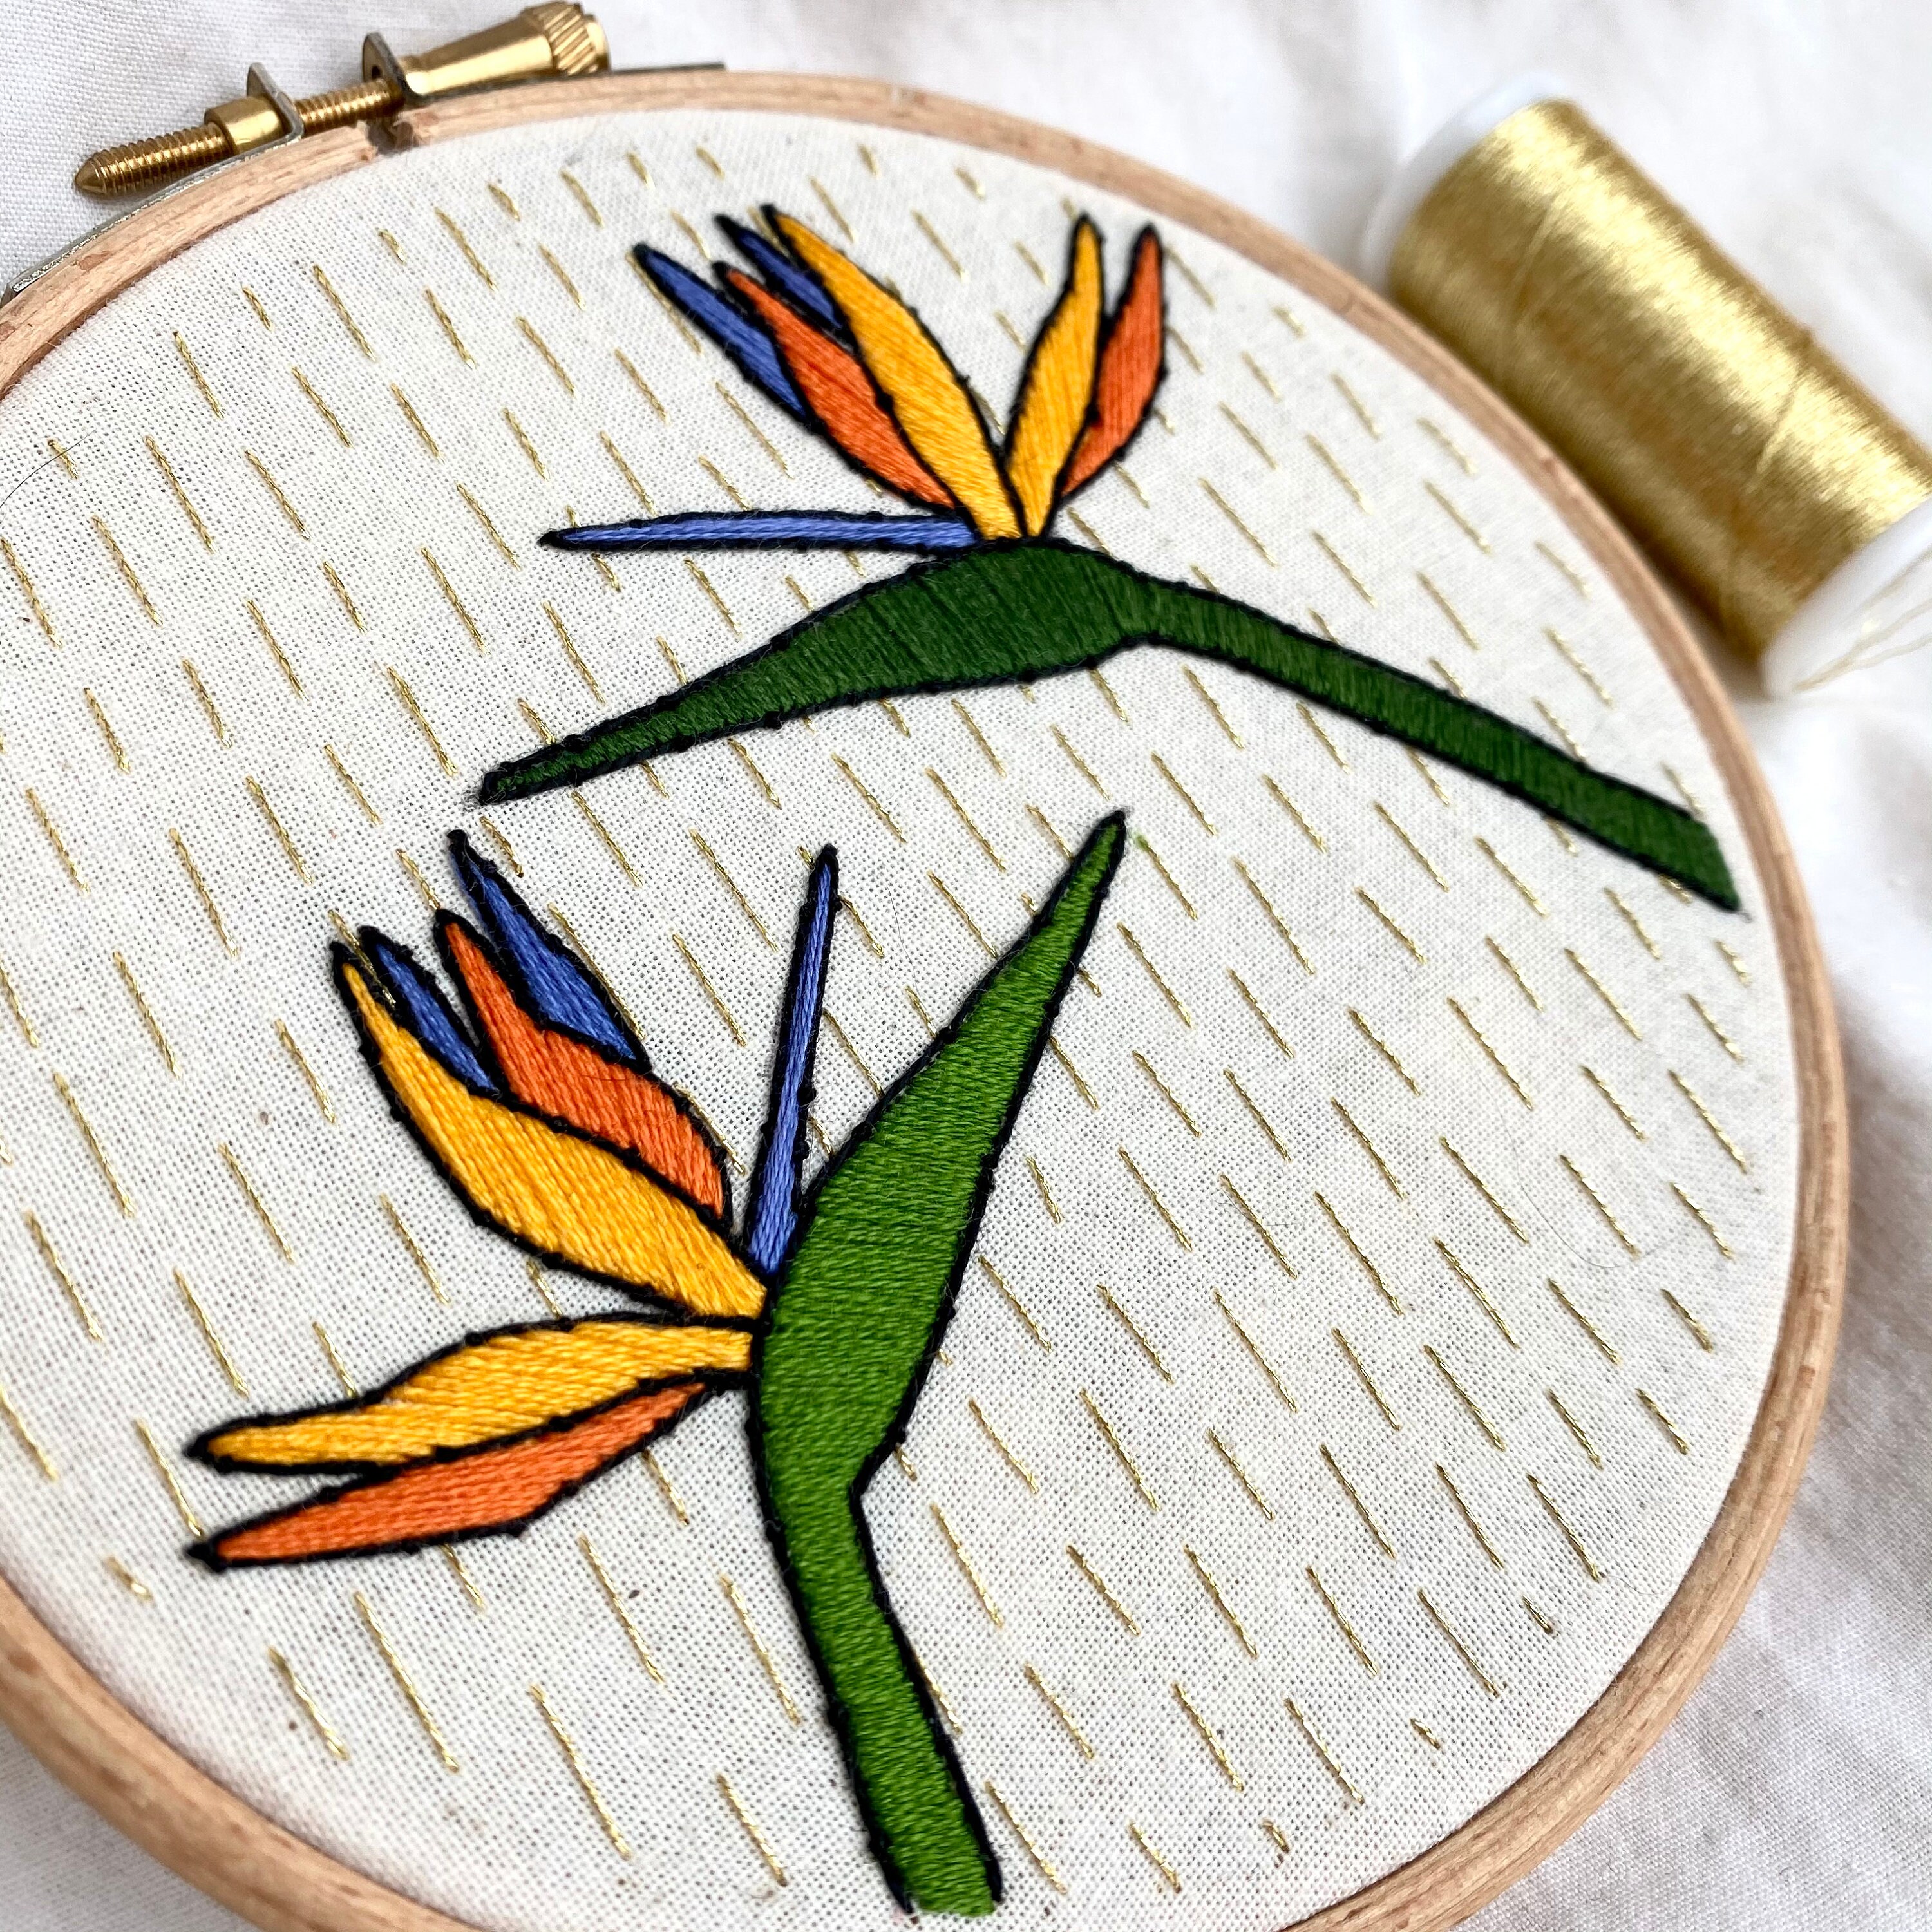 Gold Thread Embroidery, Beginner Botanical Embroidery Kit, Needlepoint Kits,  Creative Gift Box, Embroidery Designs Trendy, Adult Craft Ideas 